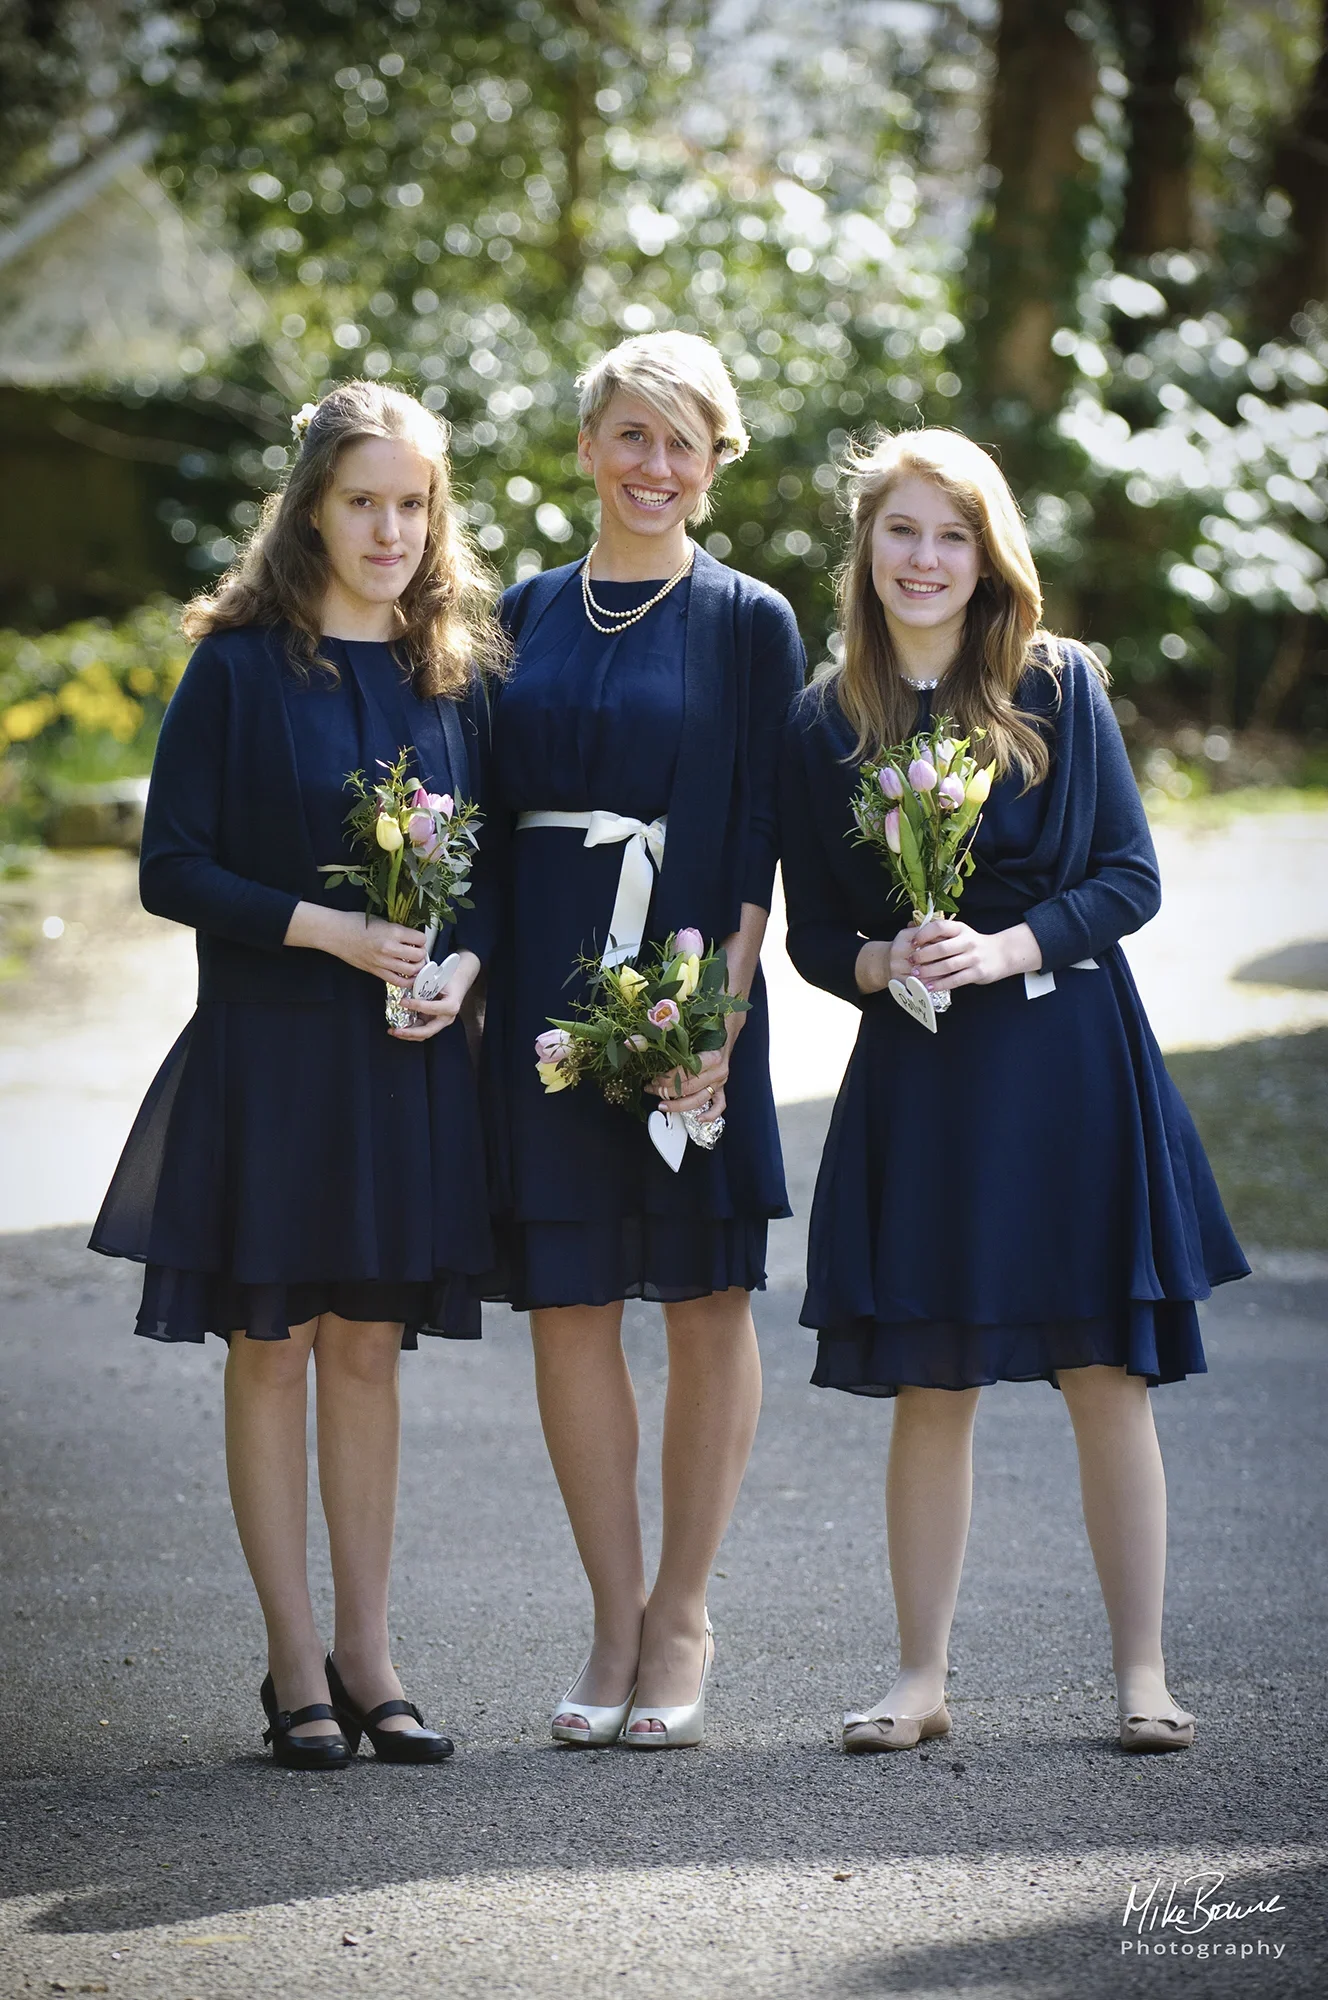 Three bridesmaids in blue dresses holding bouquets of flowers